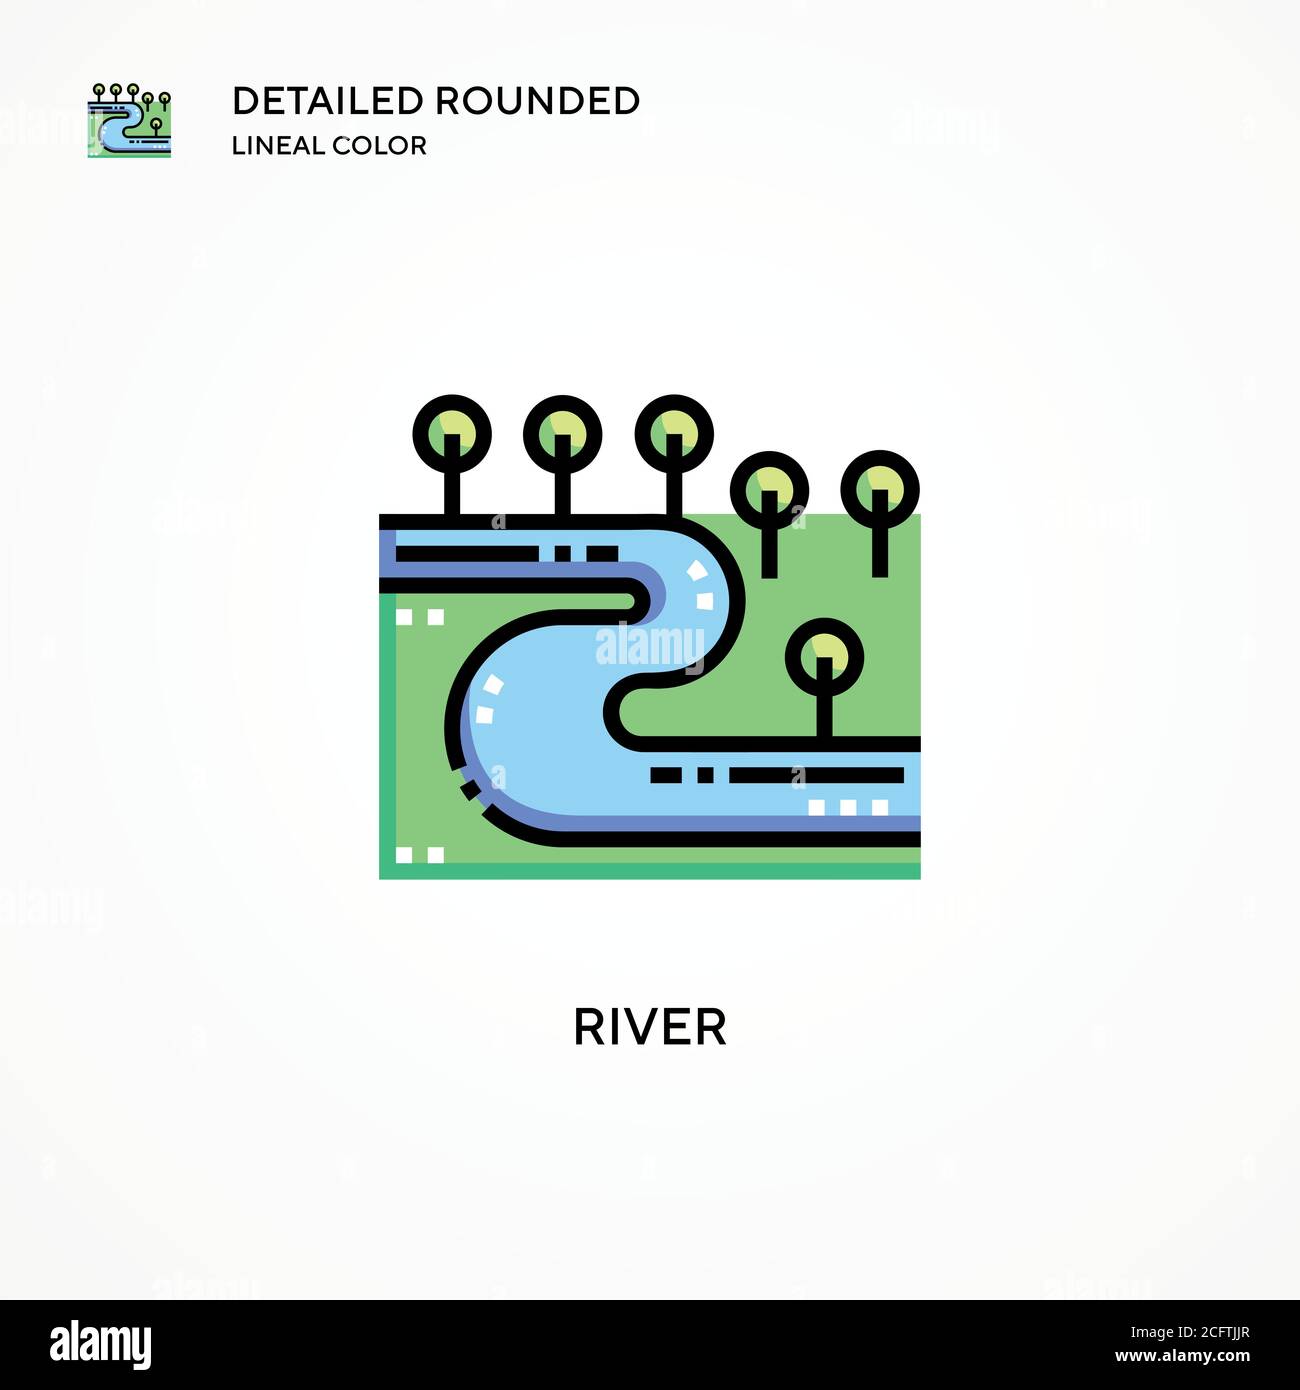 River vector icon. Modern vector illustration concepts. Easy to edit and customize. Stock Vector